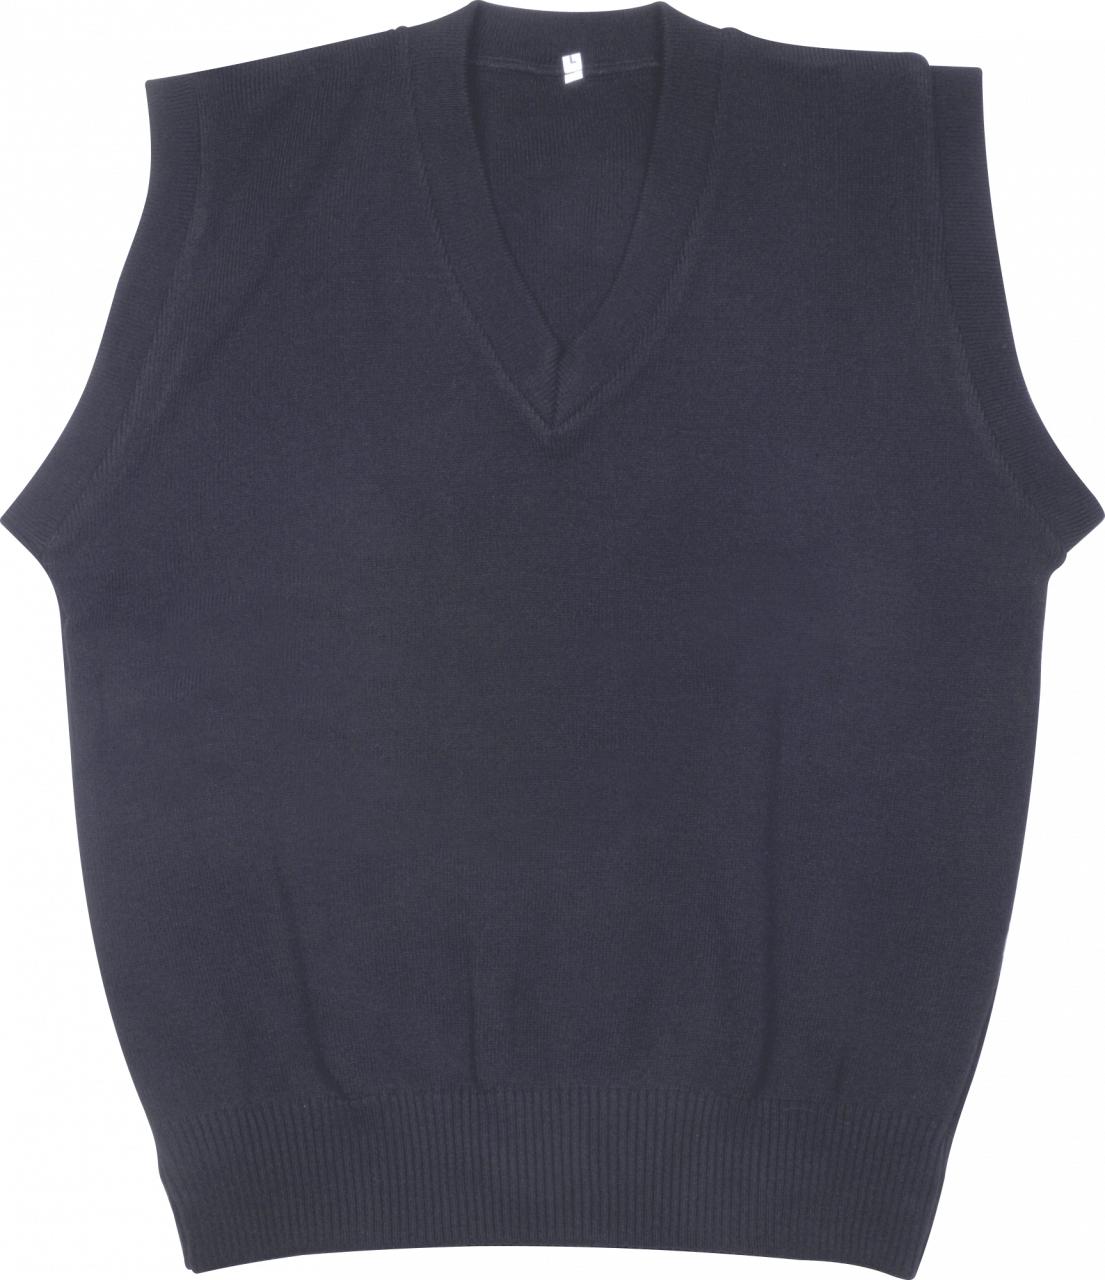 Security Jersey Corporate Single Layer - Sleeveless . Avail in N